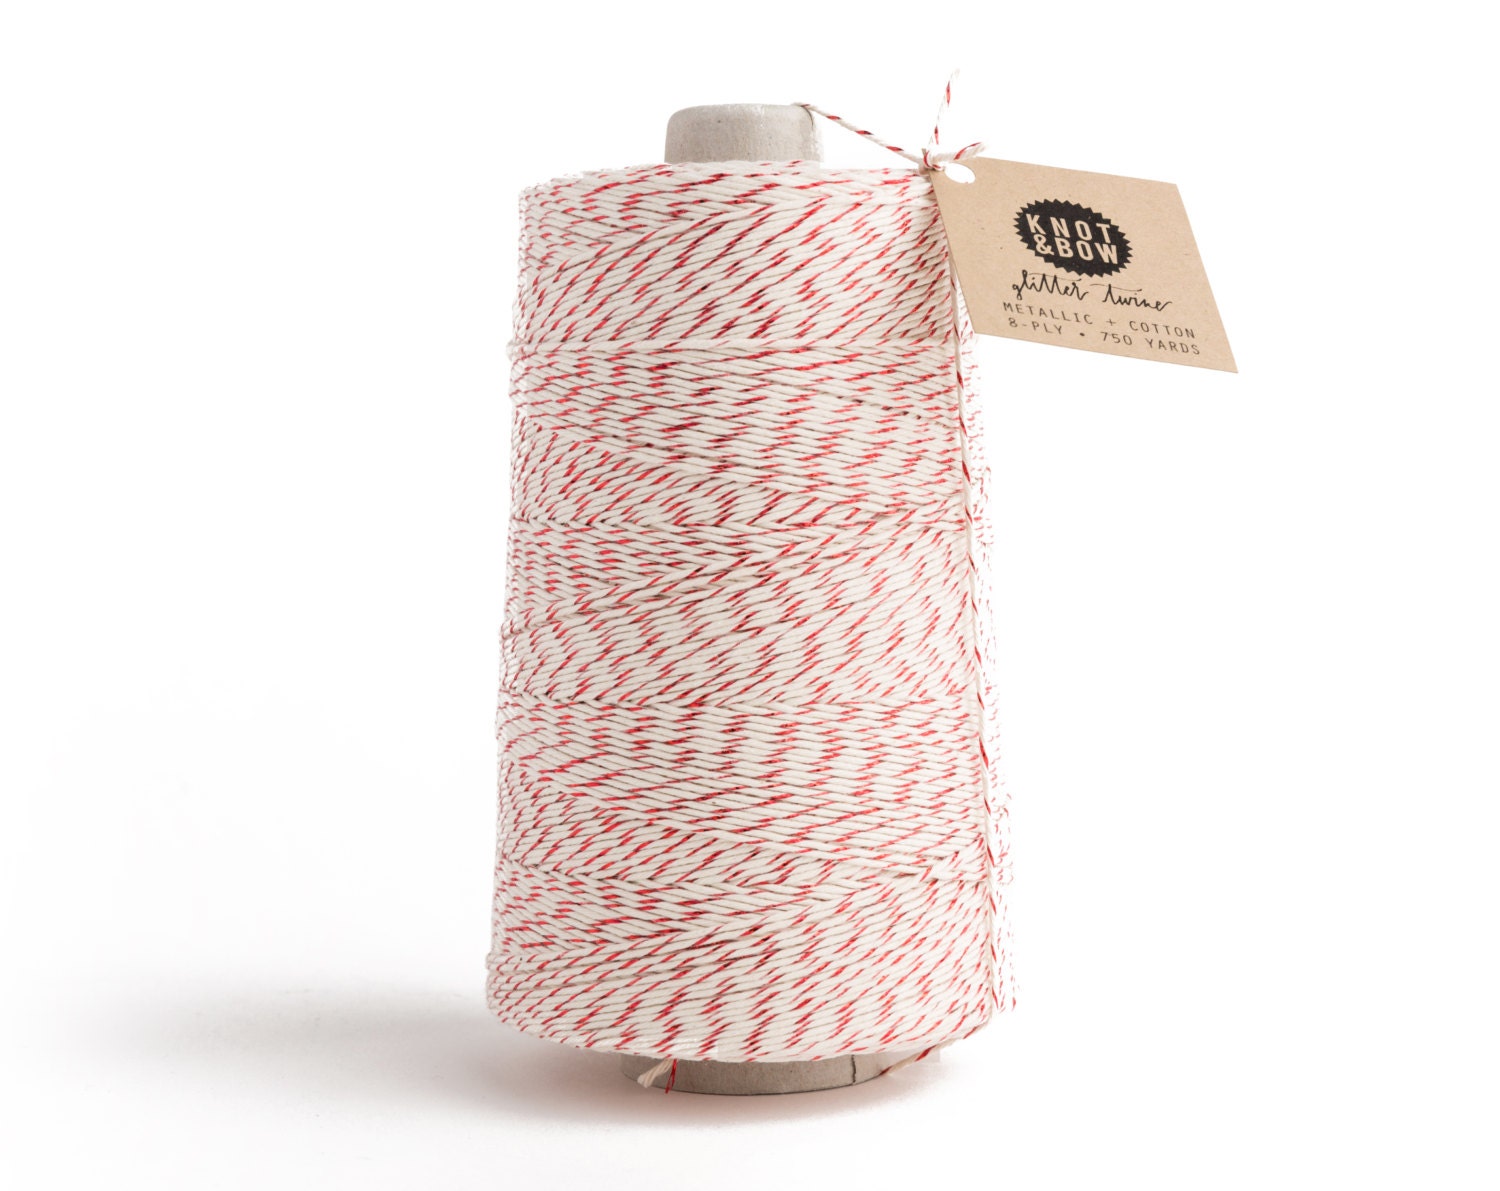 Red Solid Baker's Twine - 4-ply thin cotton twine